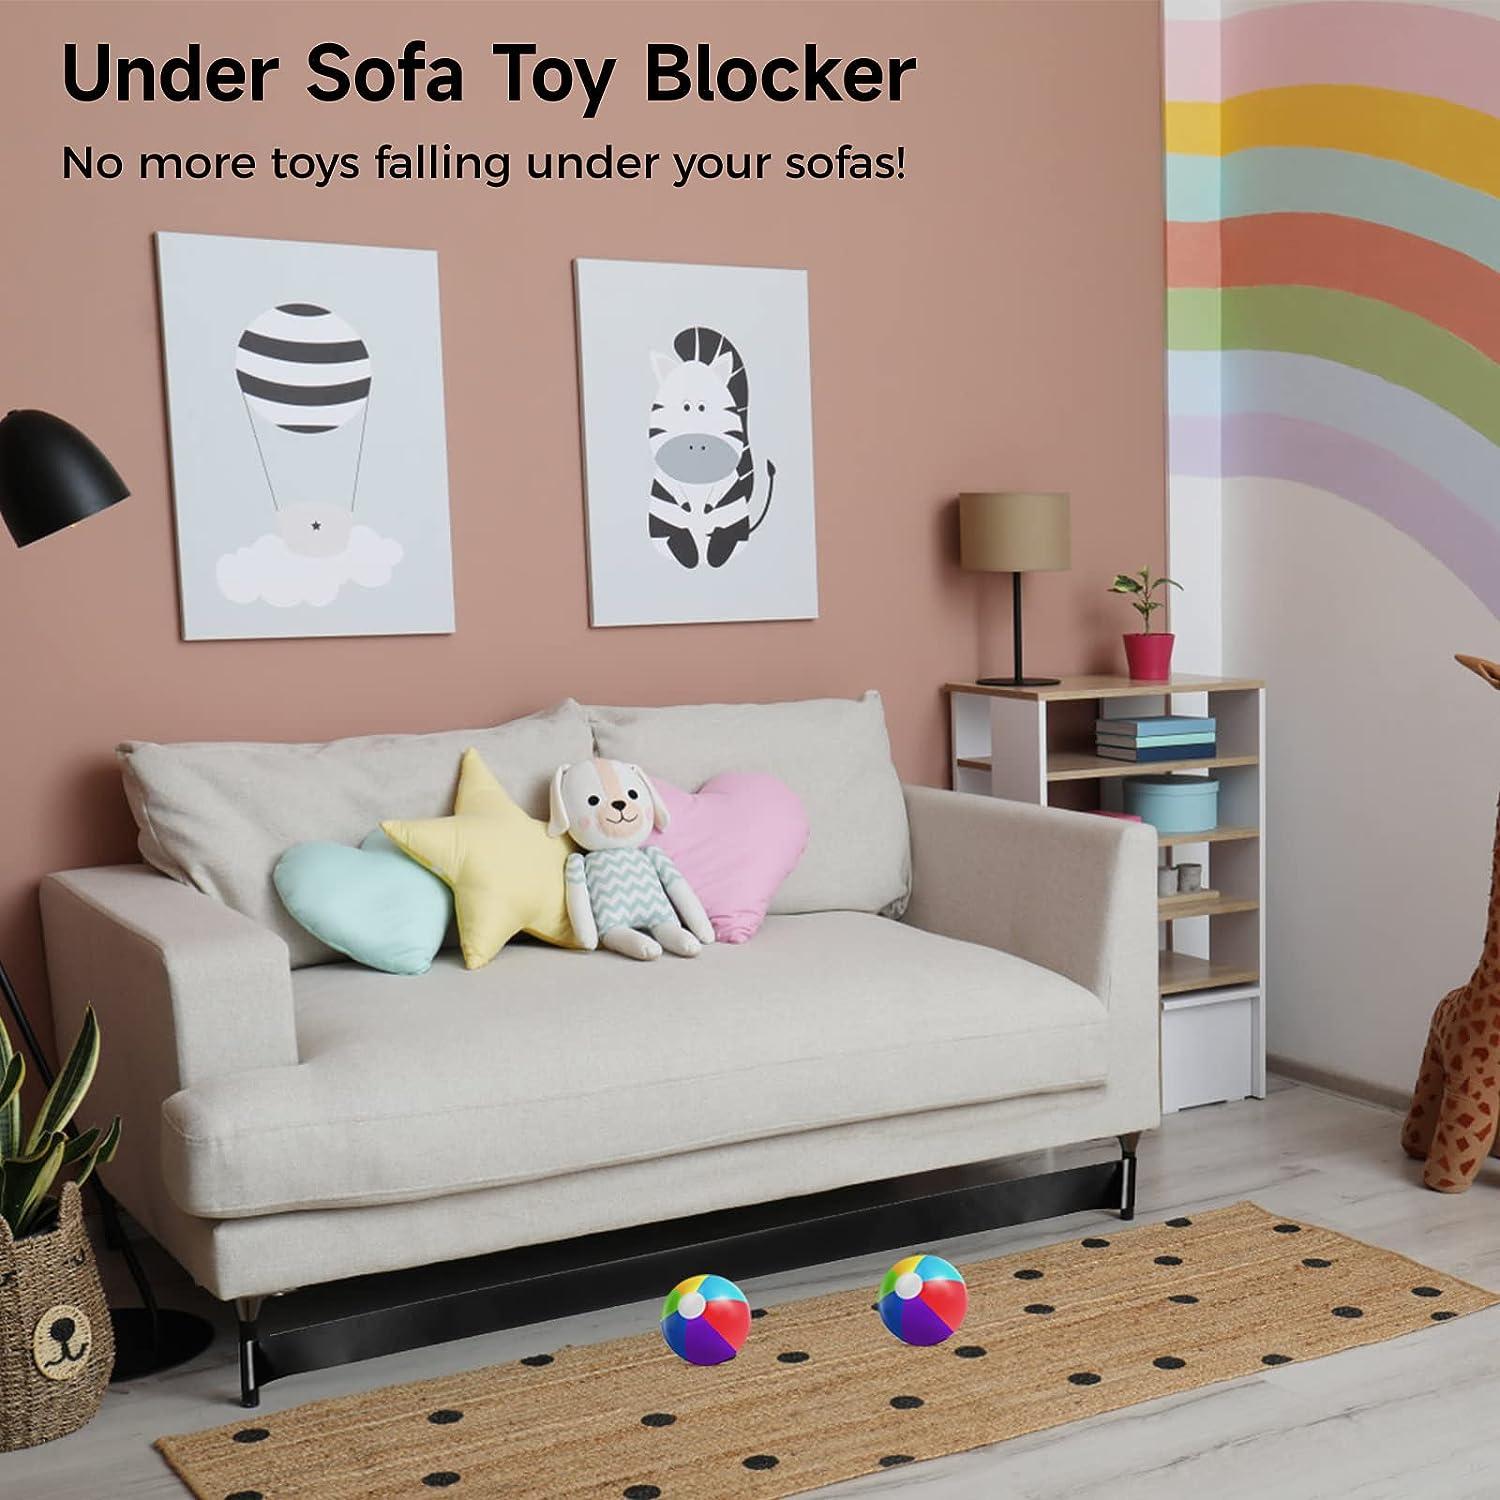 Under Couch Blocker Stretchy Toy Blockers For Furniture Under Sofa